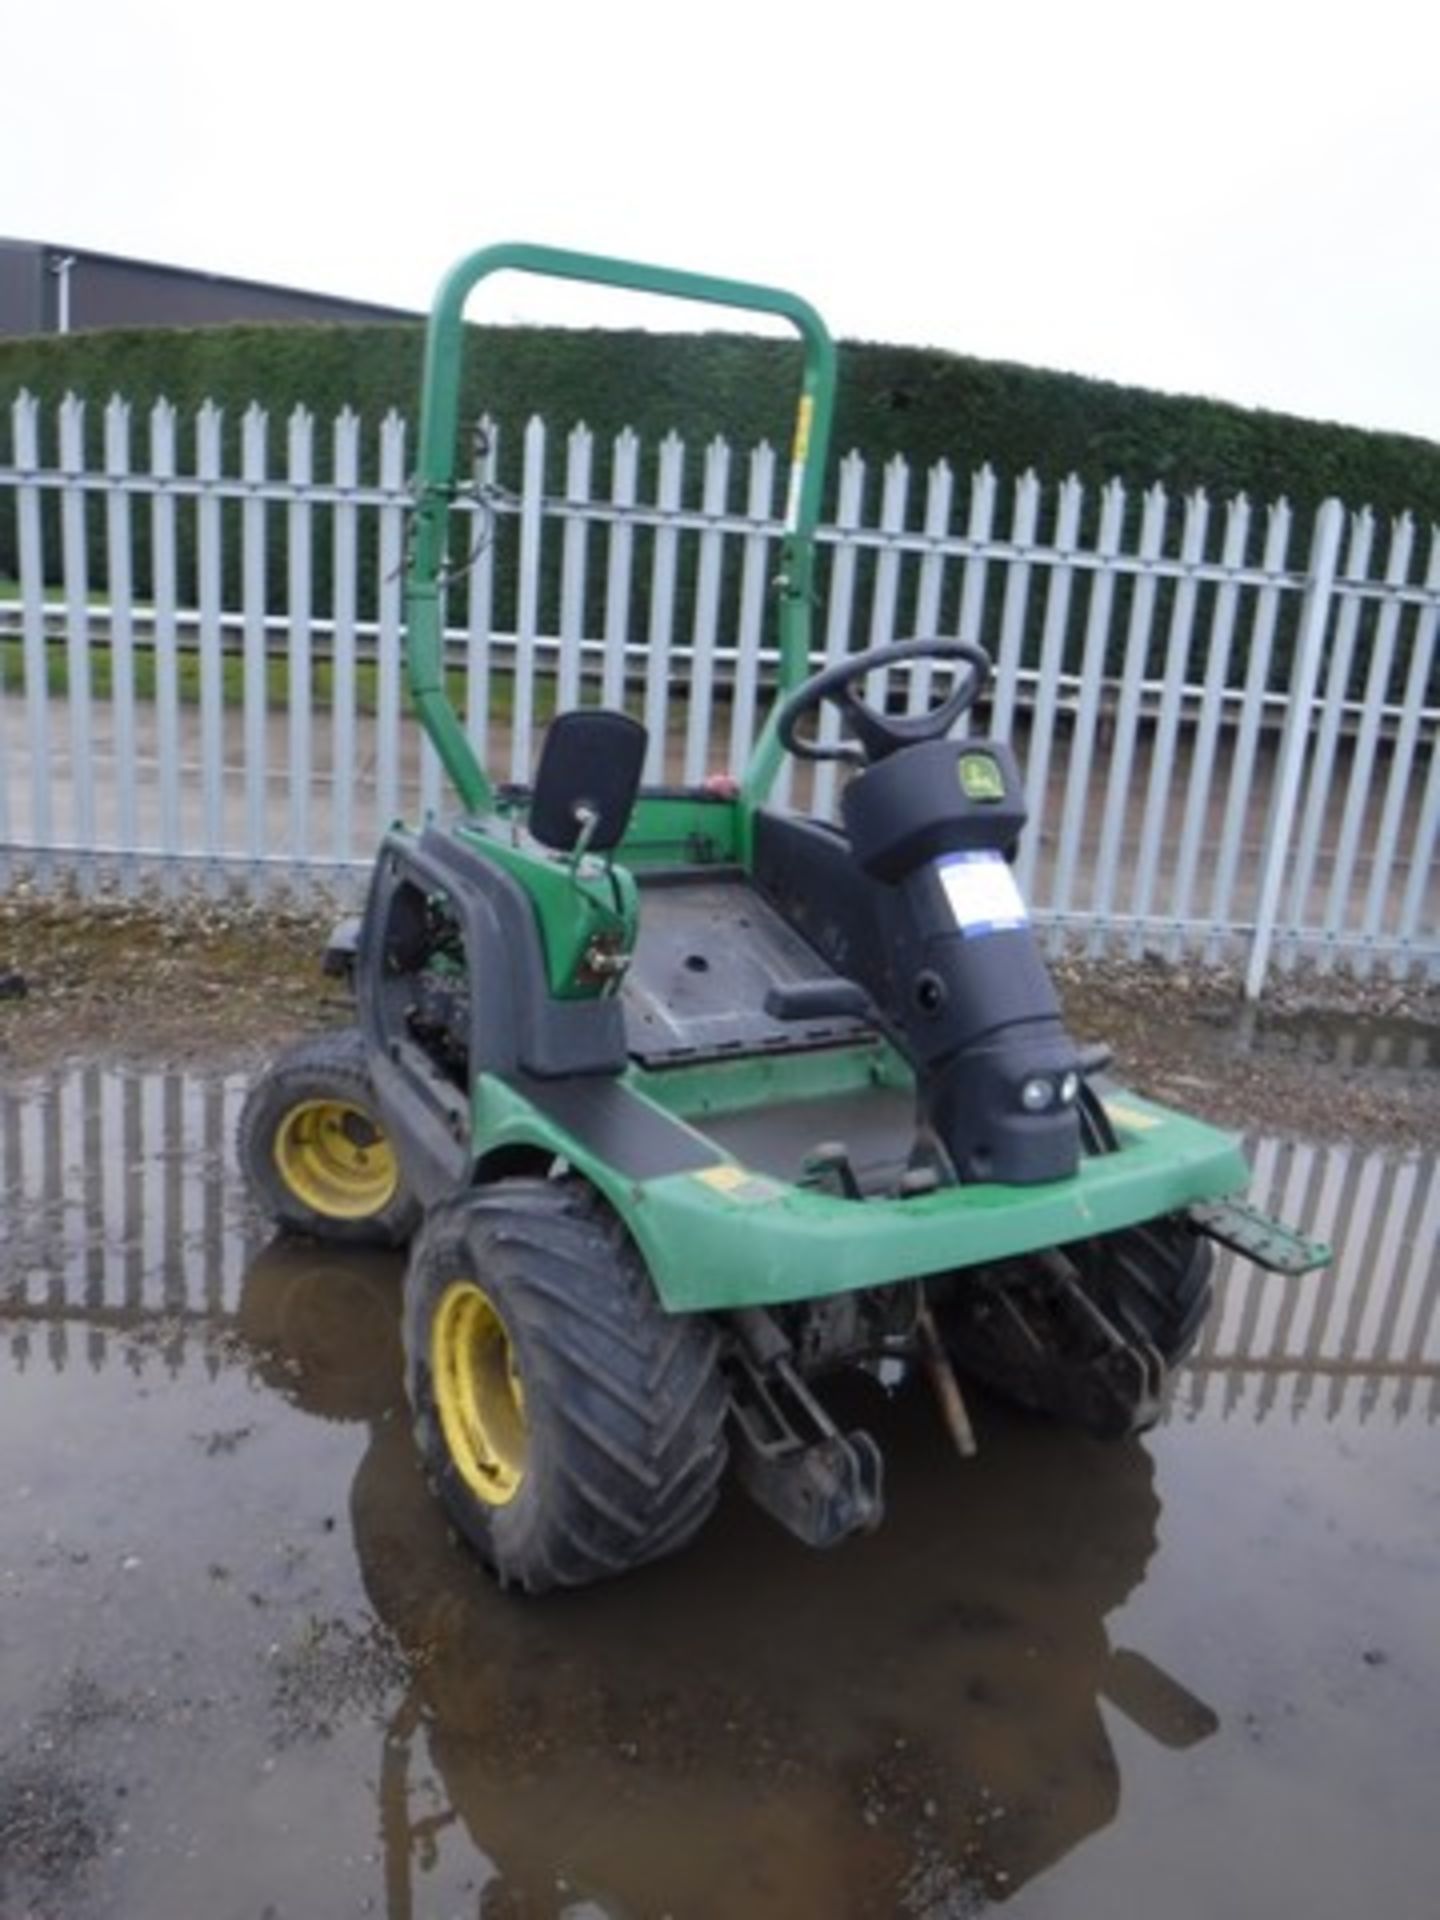 JOHN DEERE 1545 4wd mower. Reg No SP54 DOU Hrs unknown. Documents in office. **NON-RUNNER,